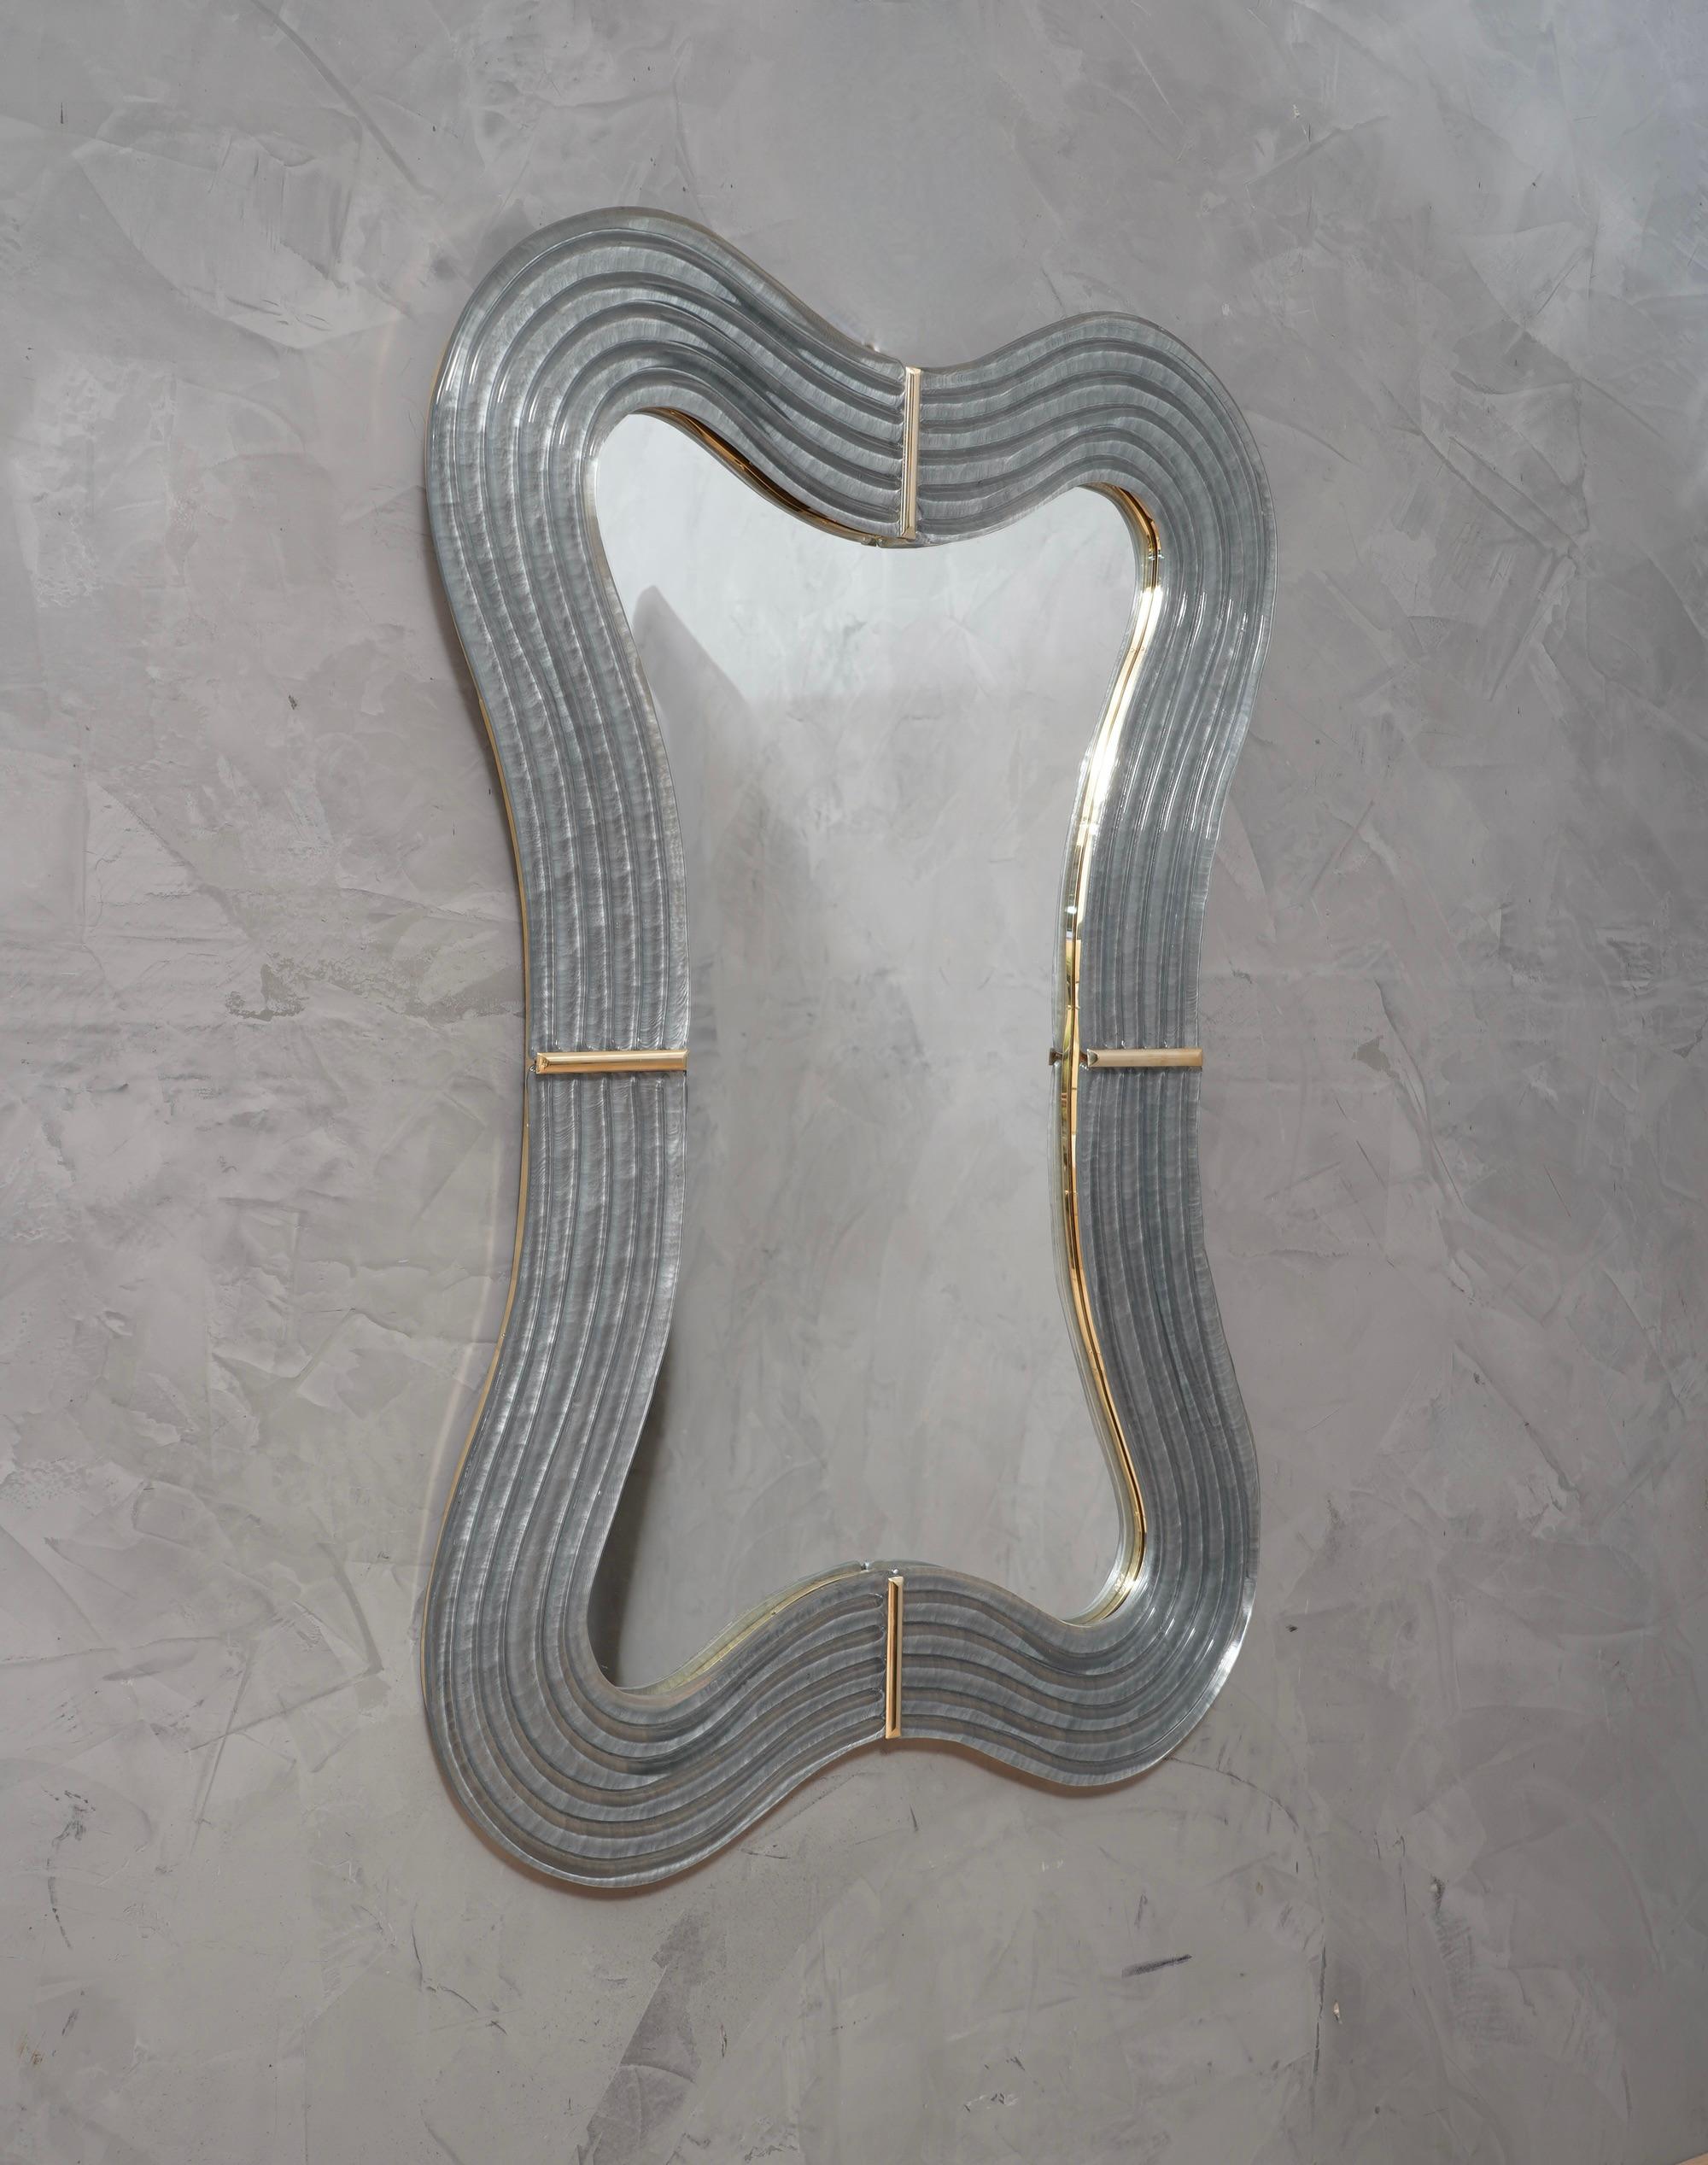 Stunning wall mirror in blazing Murano teal glass color of Venice. A mirror that alone will furnish your home environment.

The mirror is composed of a perimeter frame in Murano glass in aqua green color, which forms curves in its design, which are